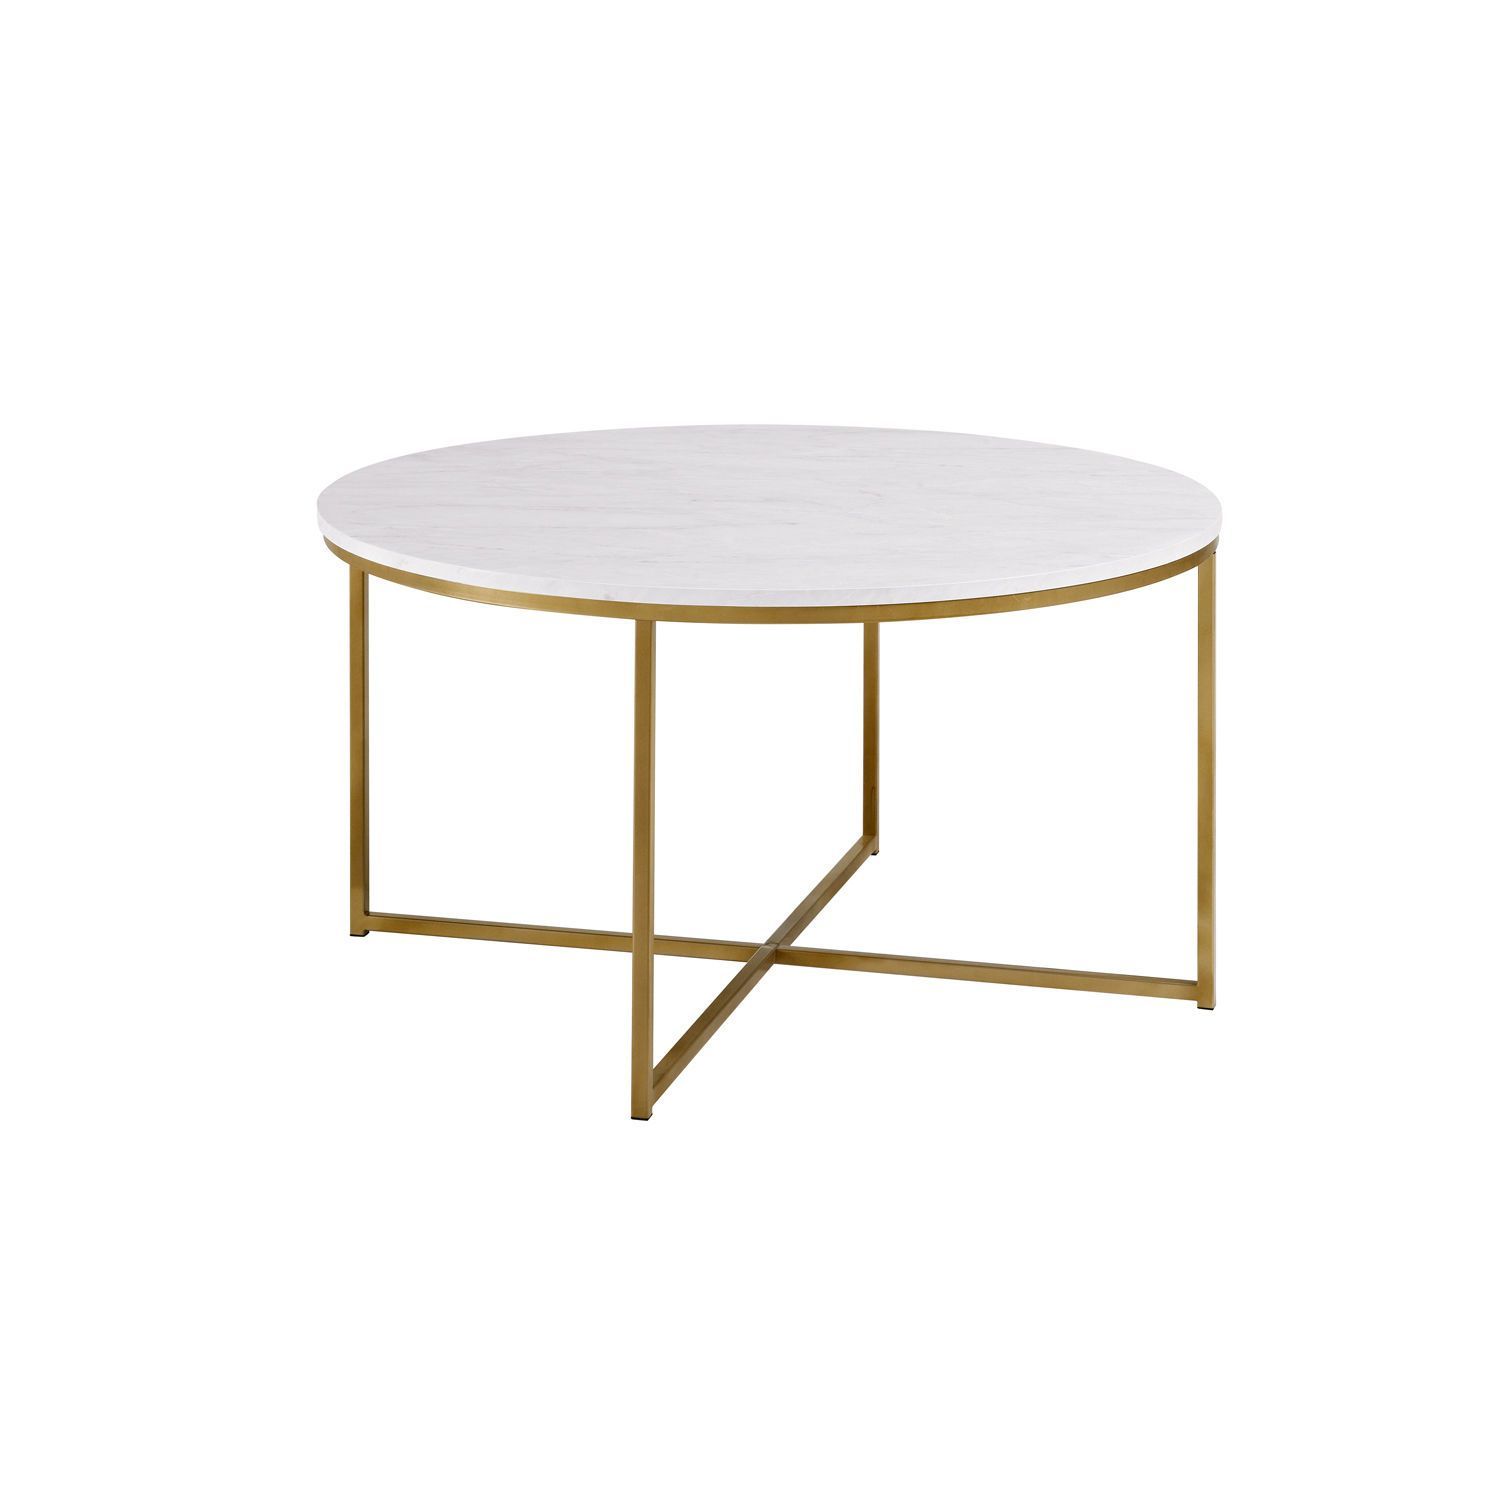 Gold X Base Faux Marble Round Coffee Table | Glam Coffee Table, Coffee Inside Modern Round Faux Marble Coffee Tables (View 18 of 20)